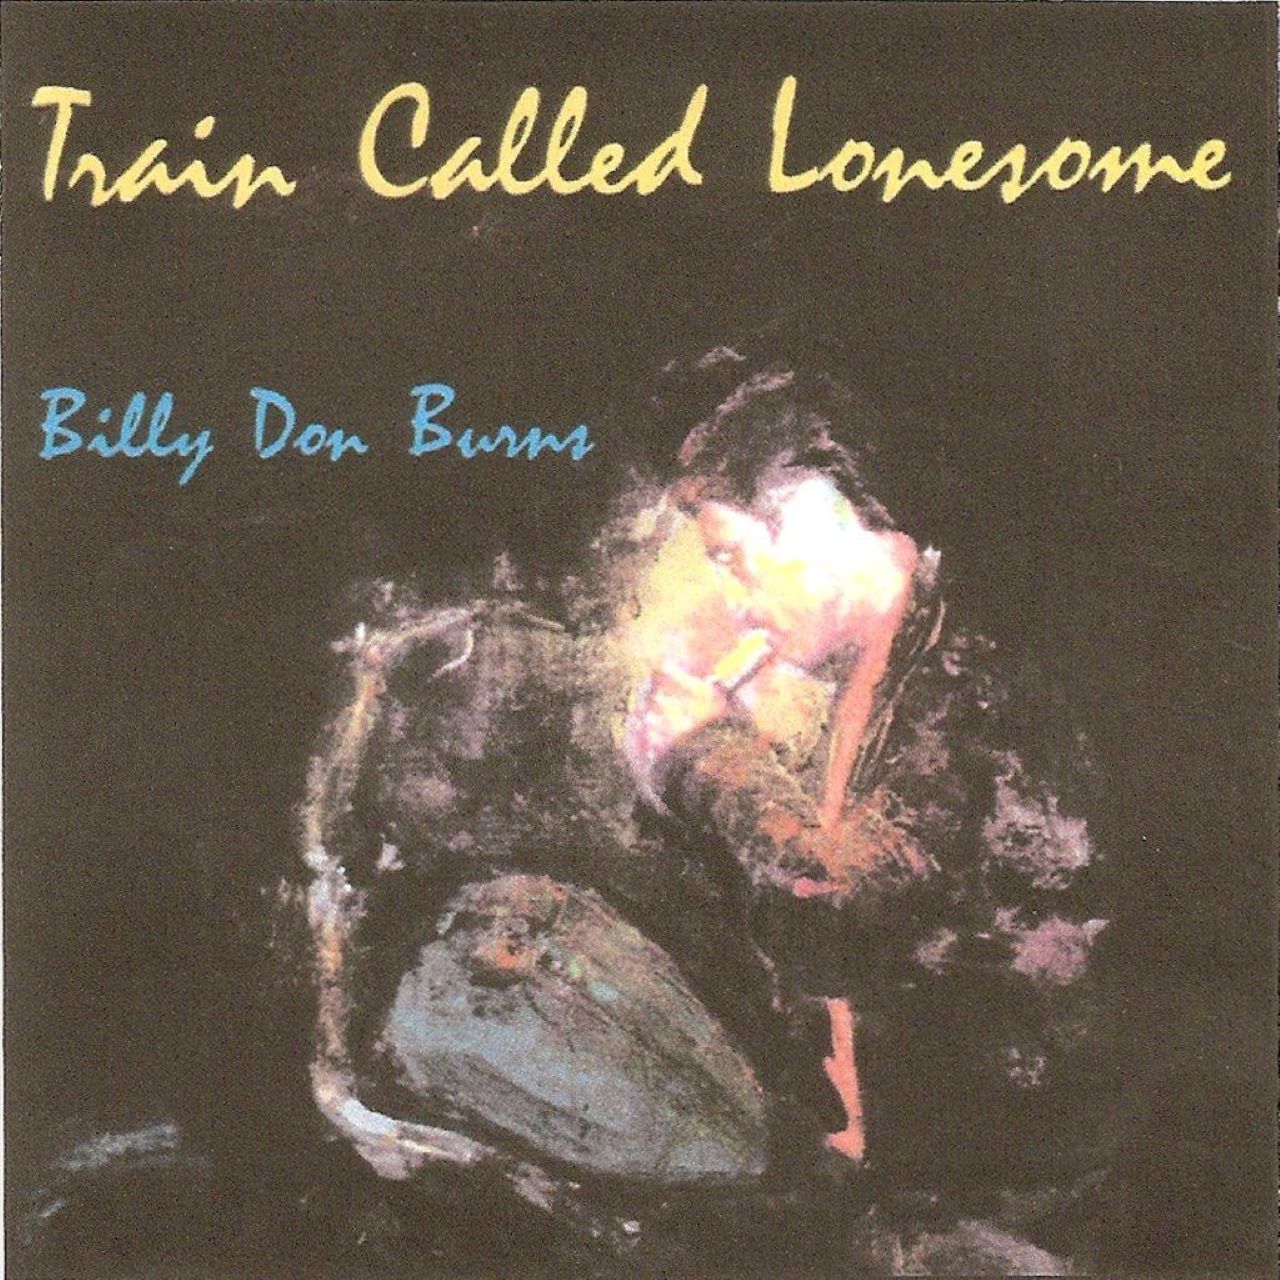 Billy Don Burns - Train Called Lonesome cover album